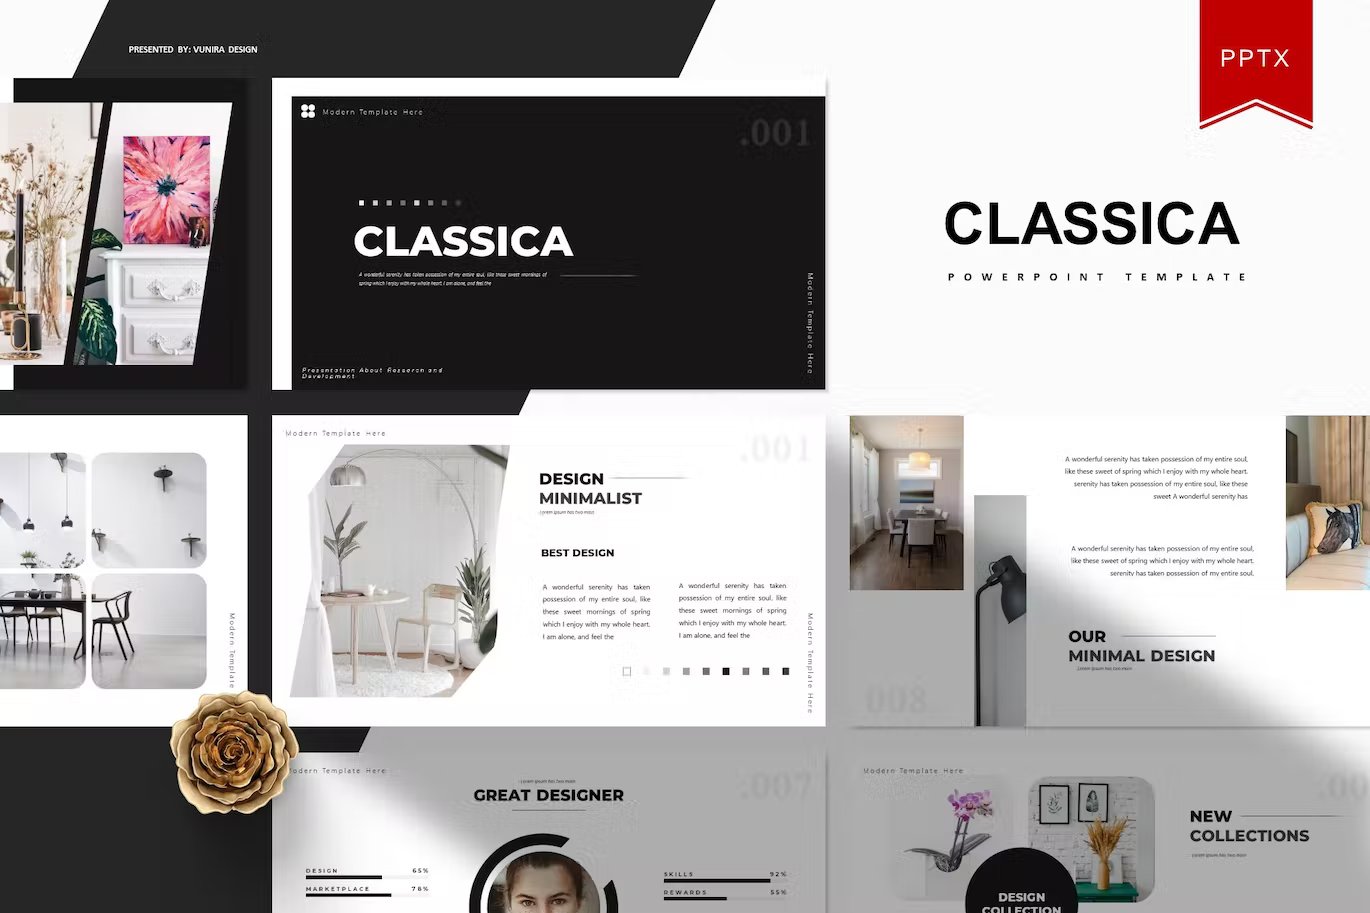 Black lettering "Classica Powerpoint Template" and different templates on a gray background.